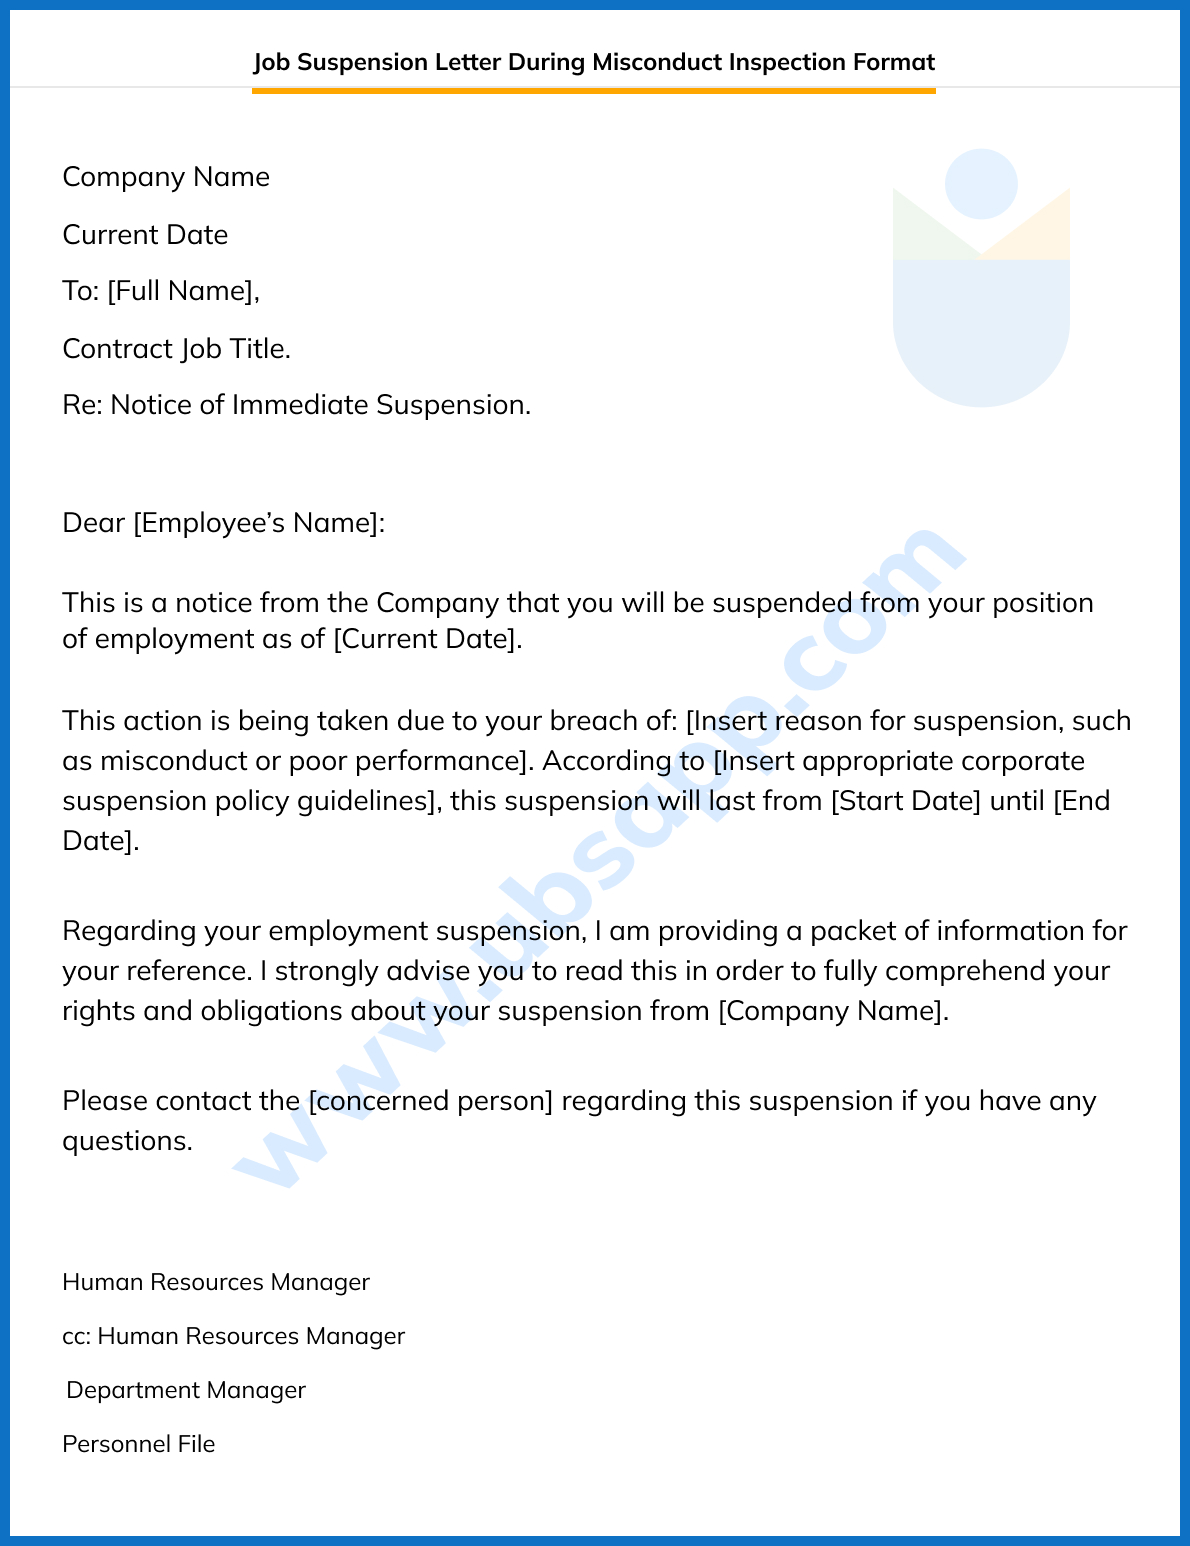 Job Suspension Letter During Misconduct Inspection Meaning, Process